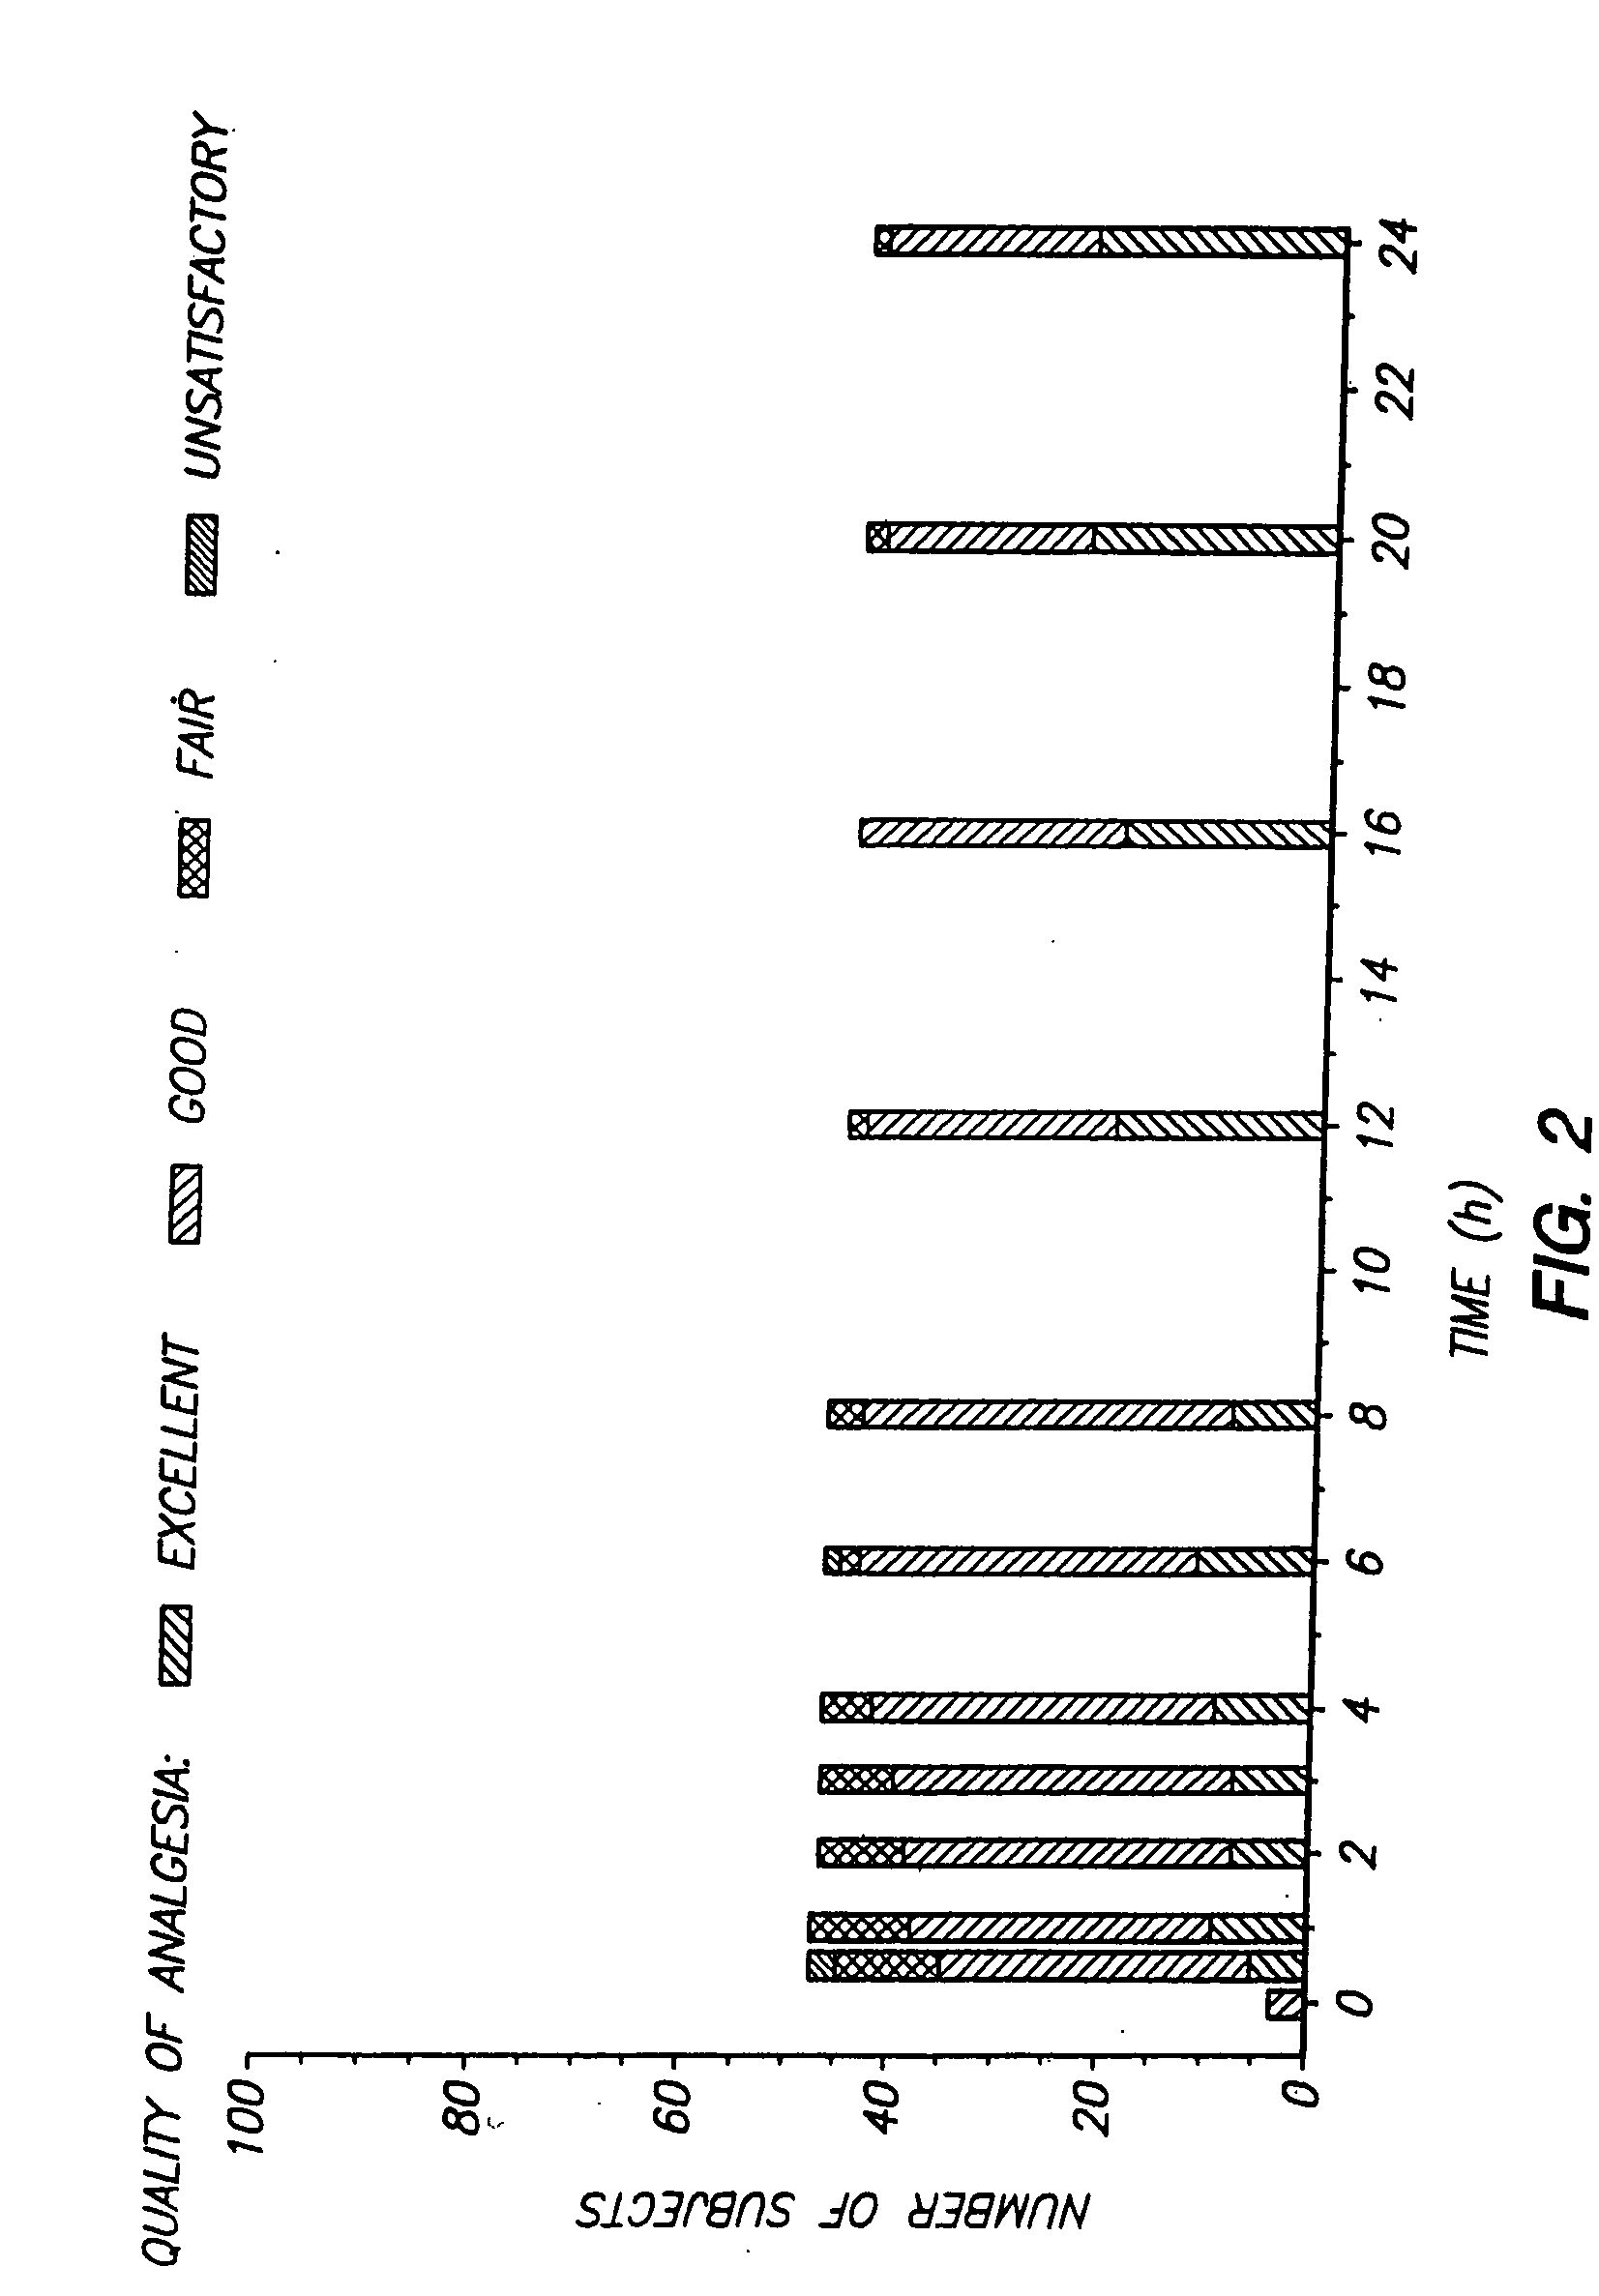 Device for transdermal electrotransport delivery of fentanyl and sufentanil